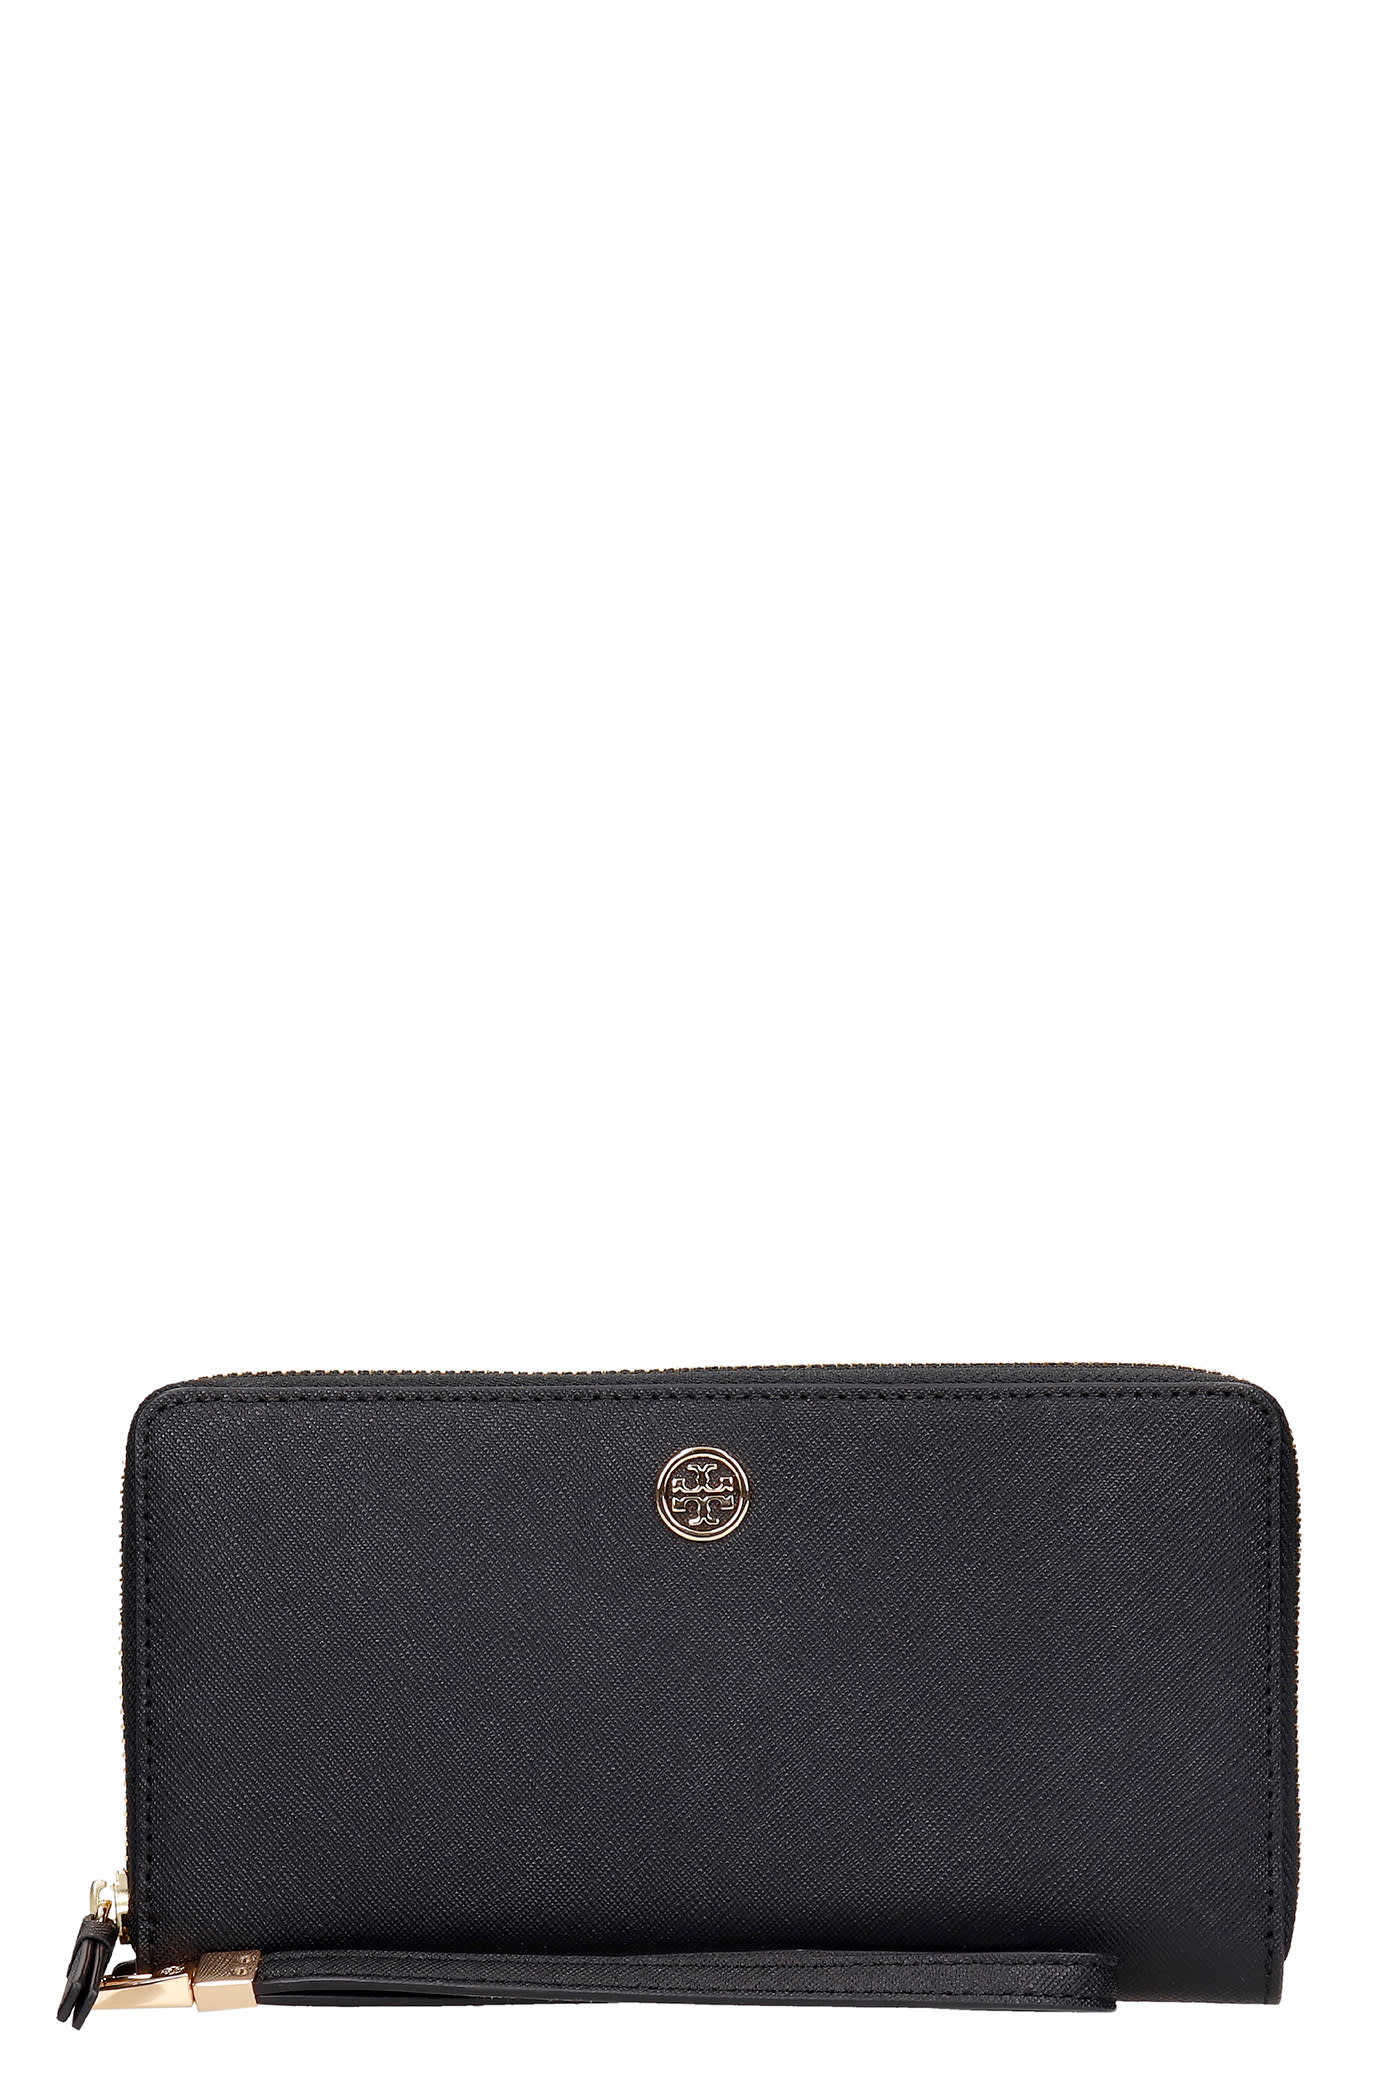 Tory Burch Robinson Zip Wallet In Black Leather